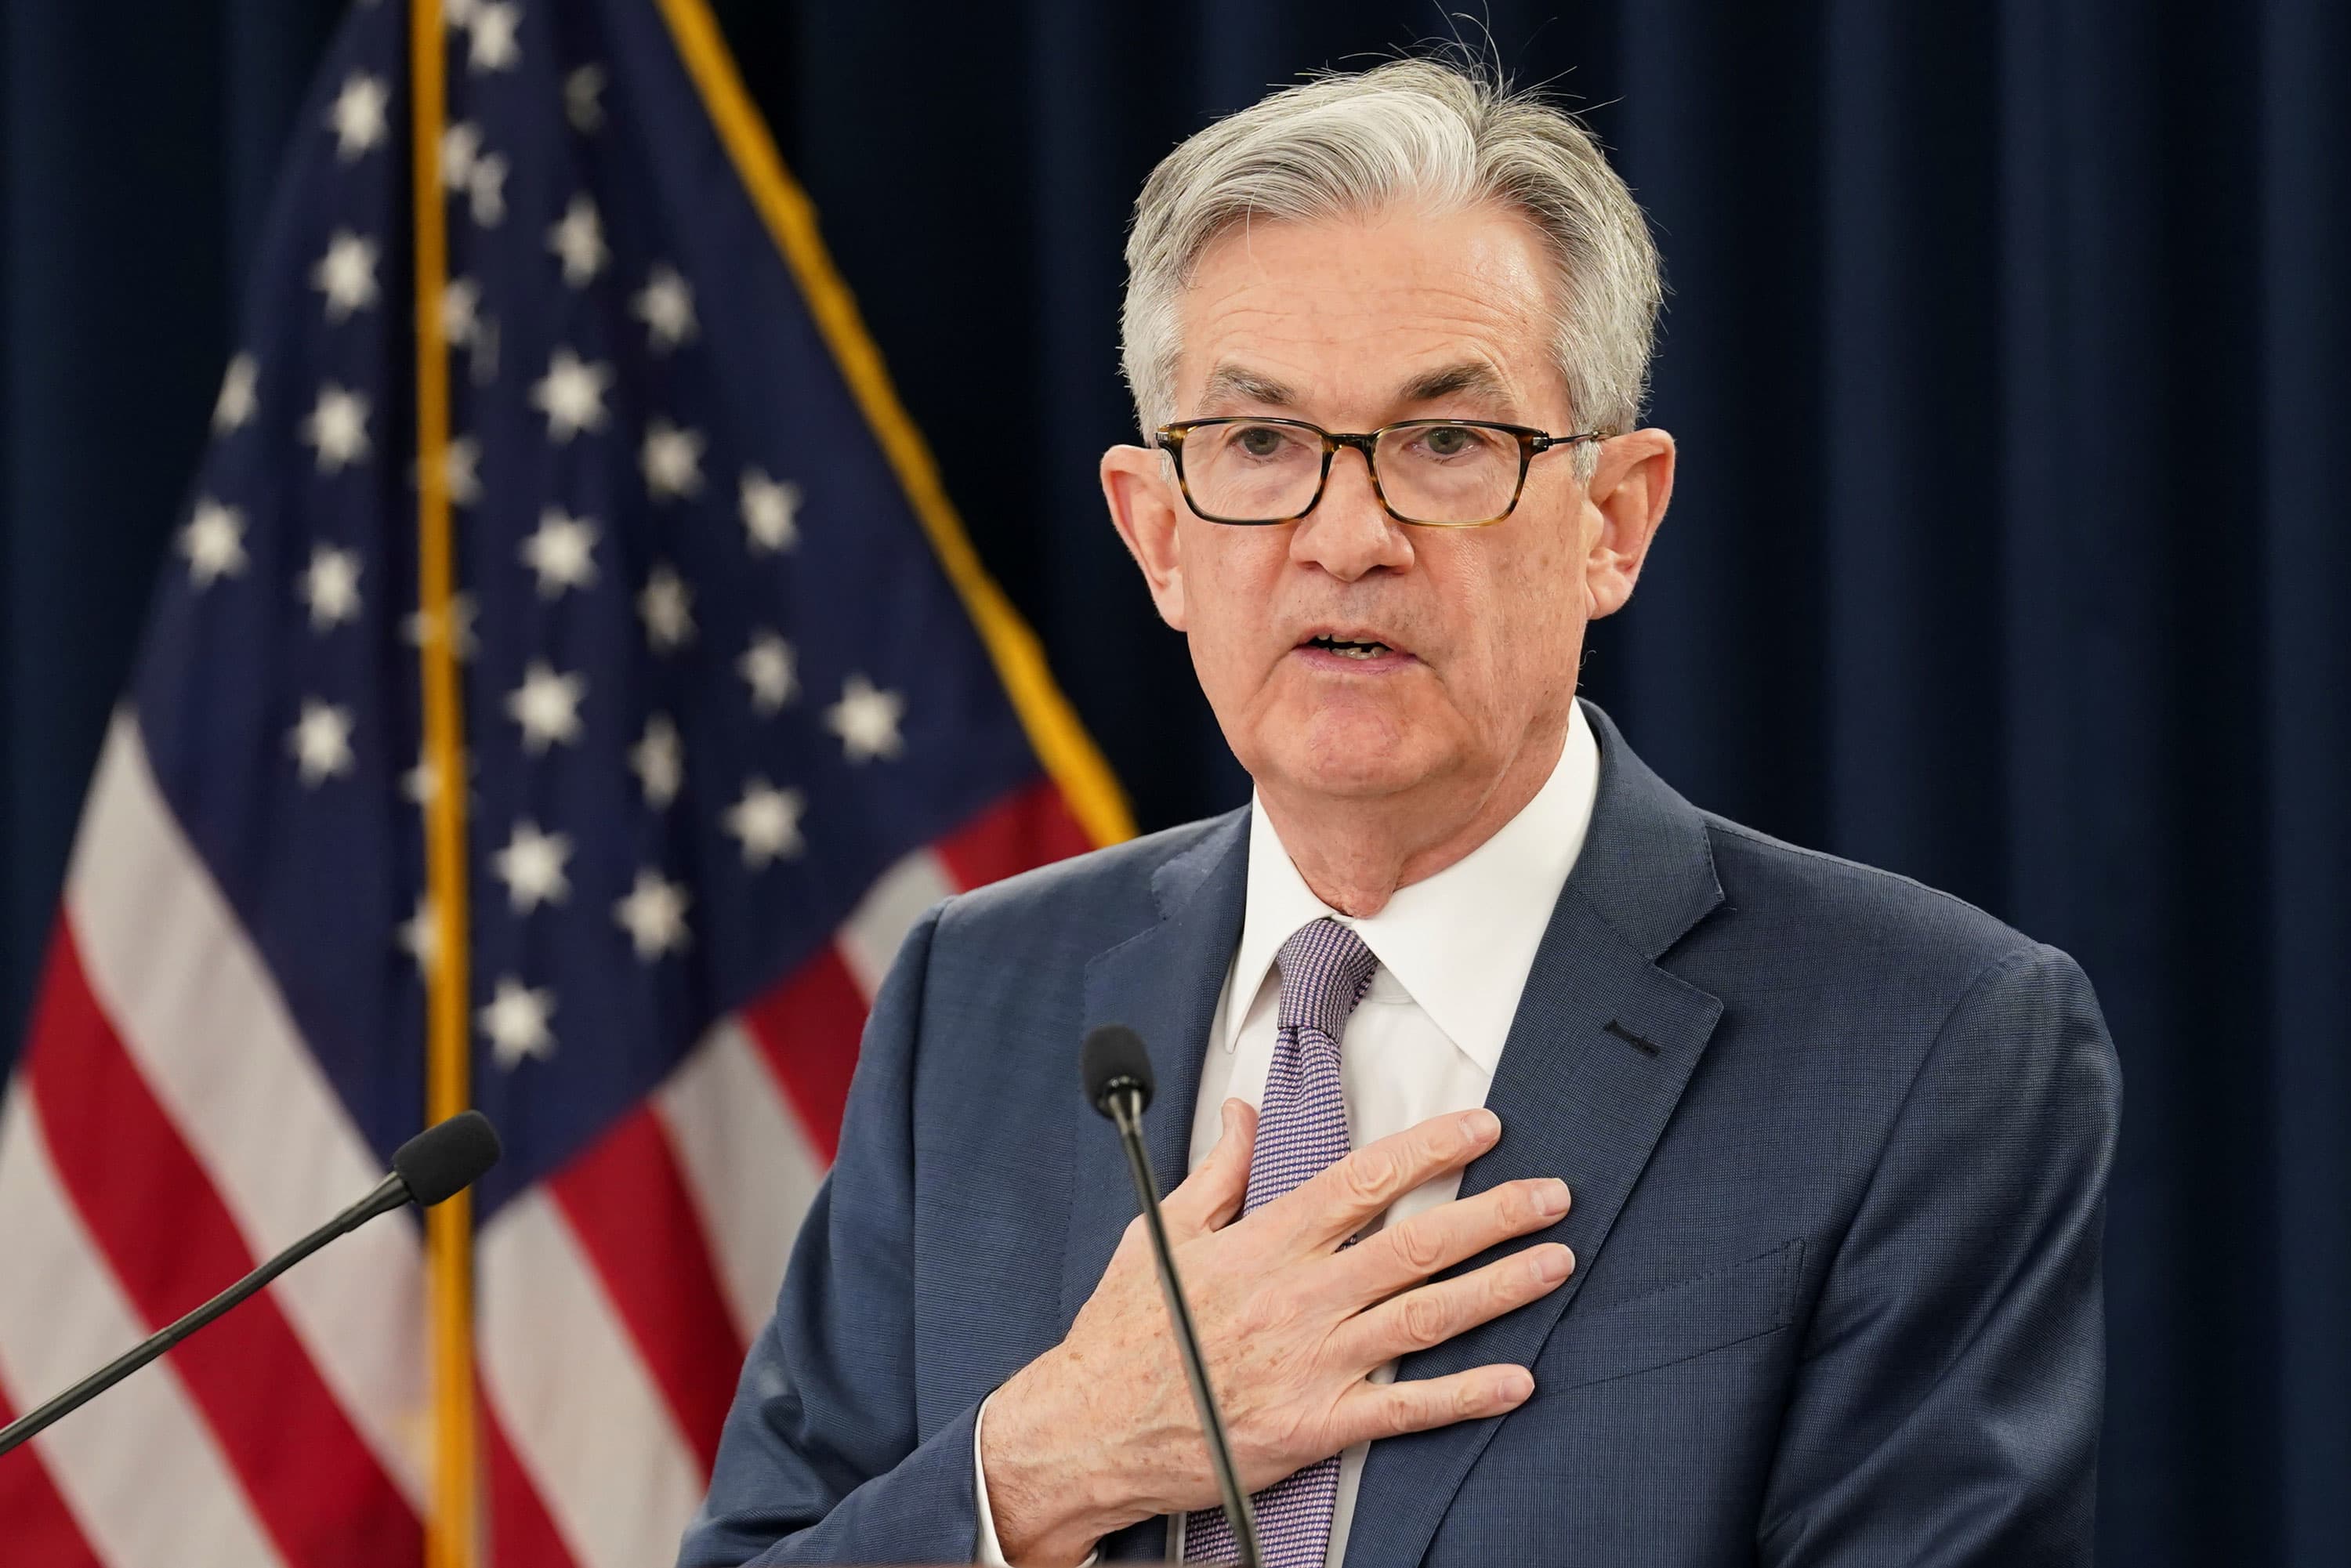 The Fed can fight inflation, but it can come at a cost